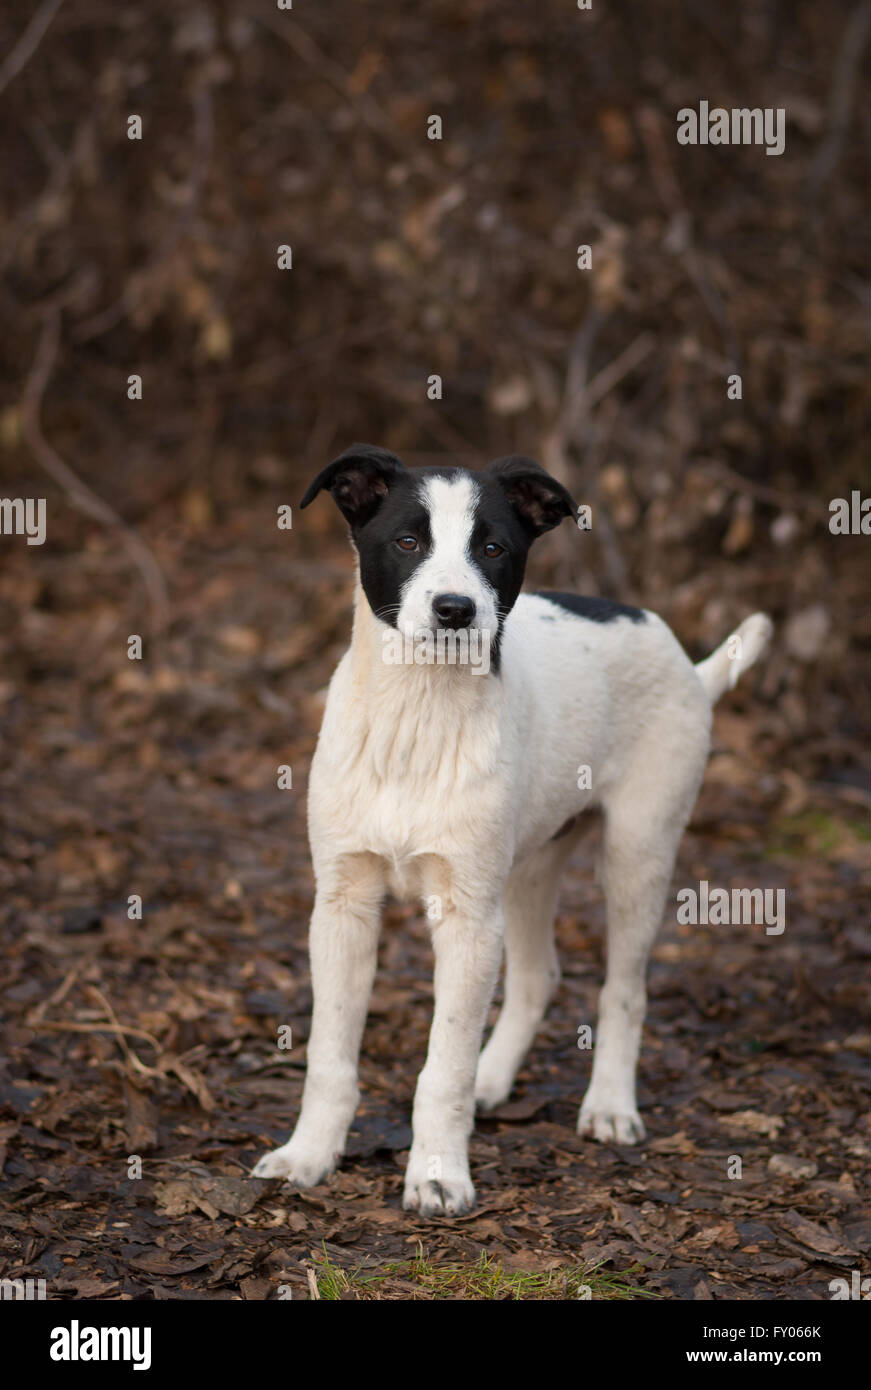 Lost stray puppy is waiting for mom in sinister place Stock Photo